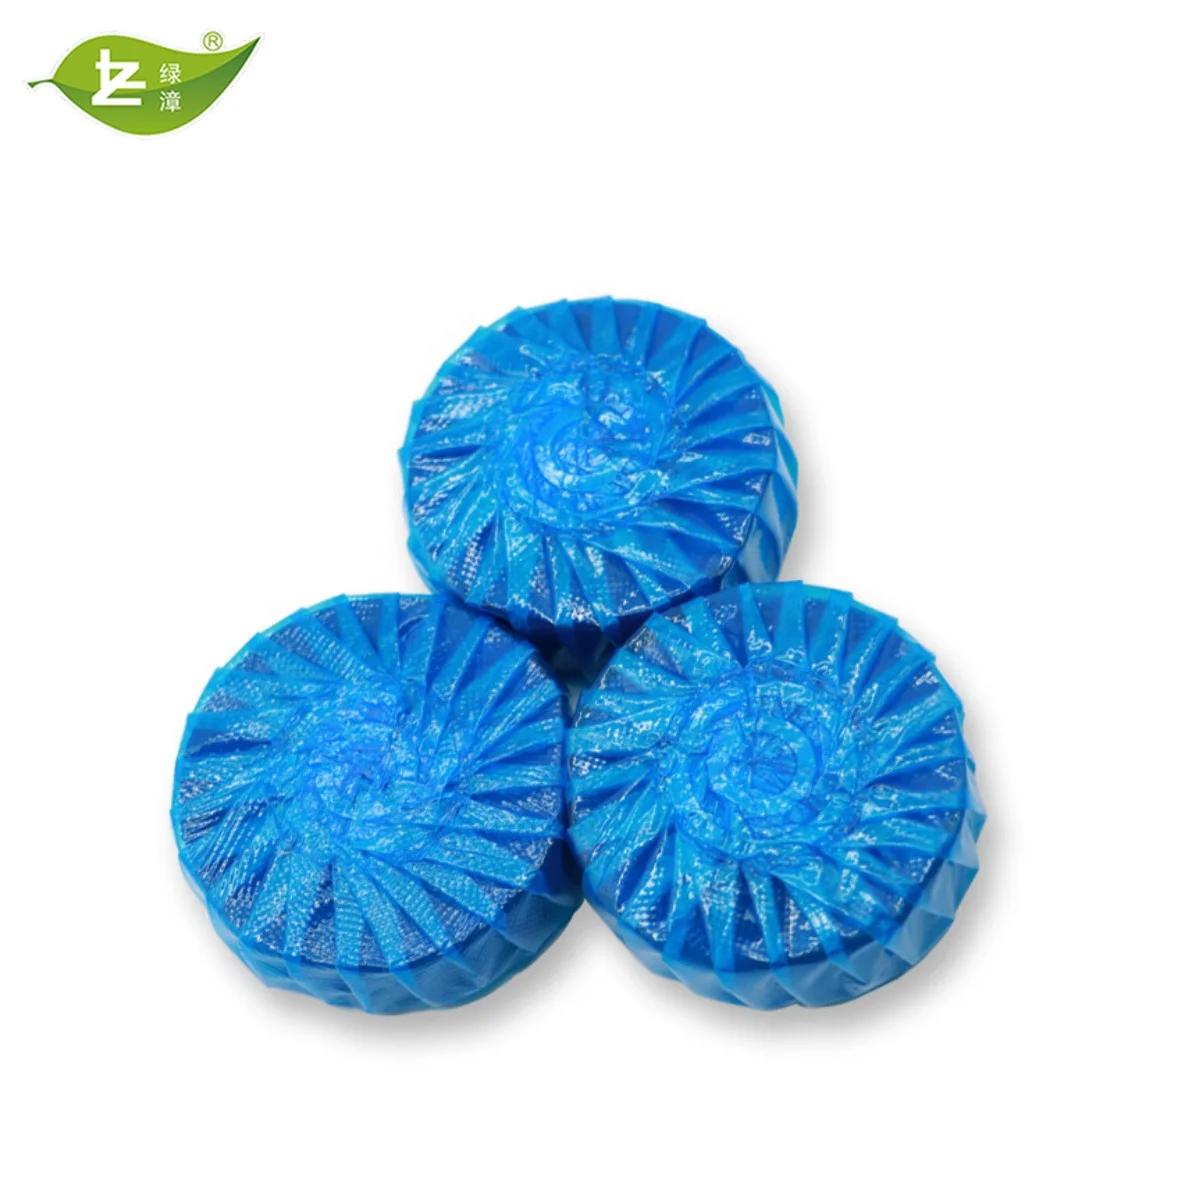 Yiwu Factory Direct Sales  High quality Cheaper price blue bubble automatic  deodorant toilet bowl cleaner blocks